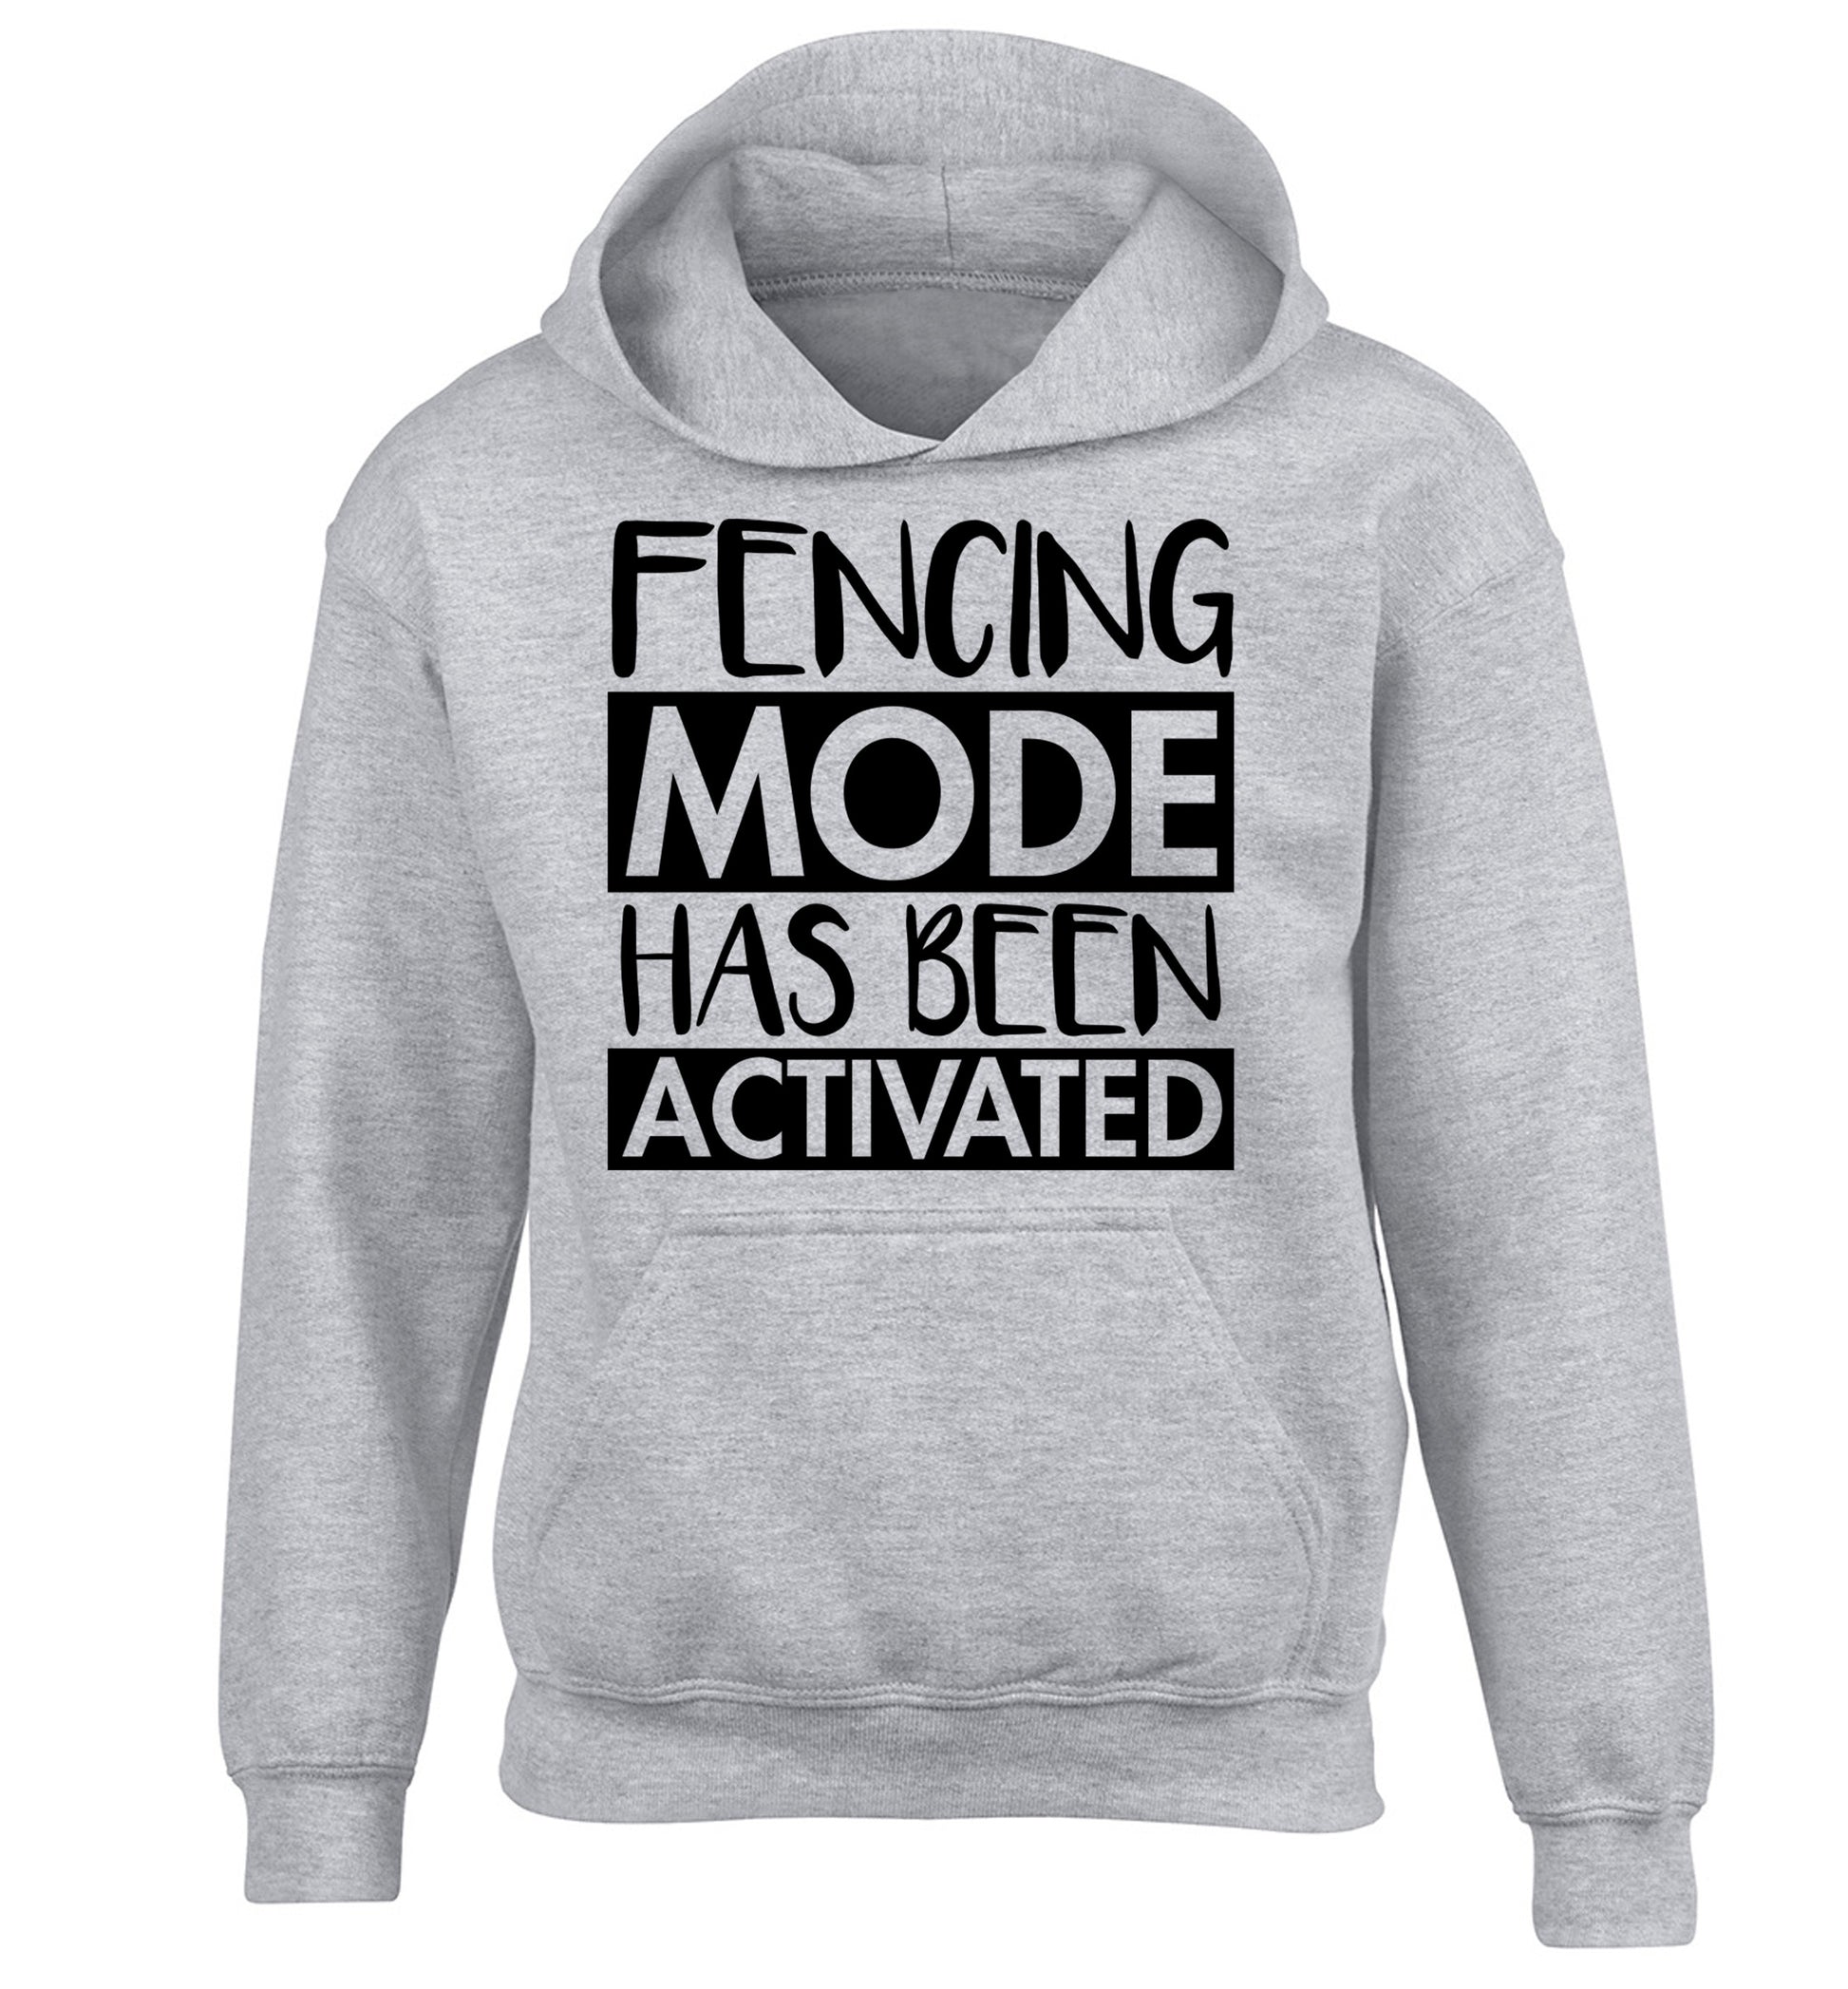 Fencing mode activated children's grey hoodie 12-14 Years